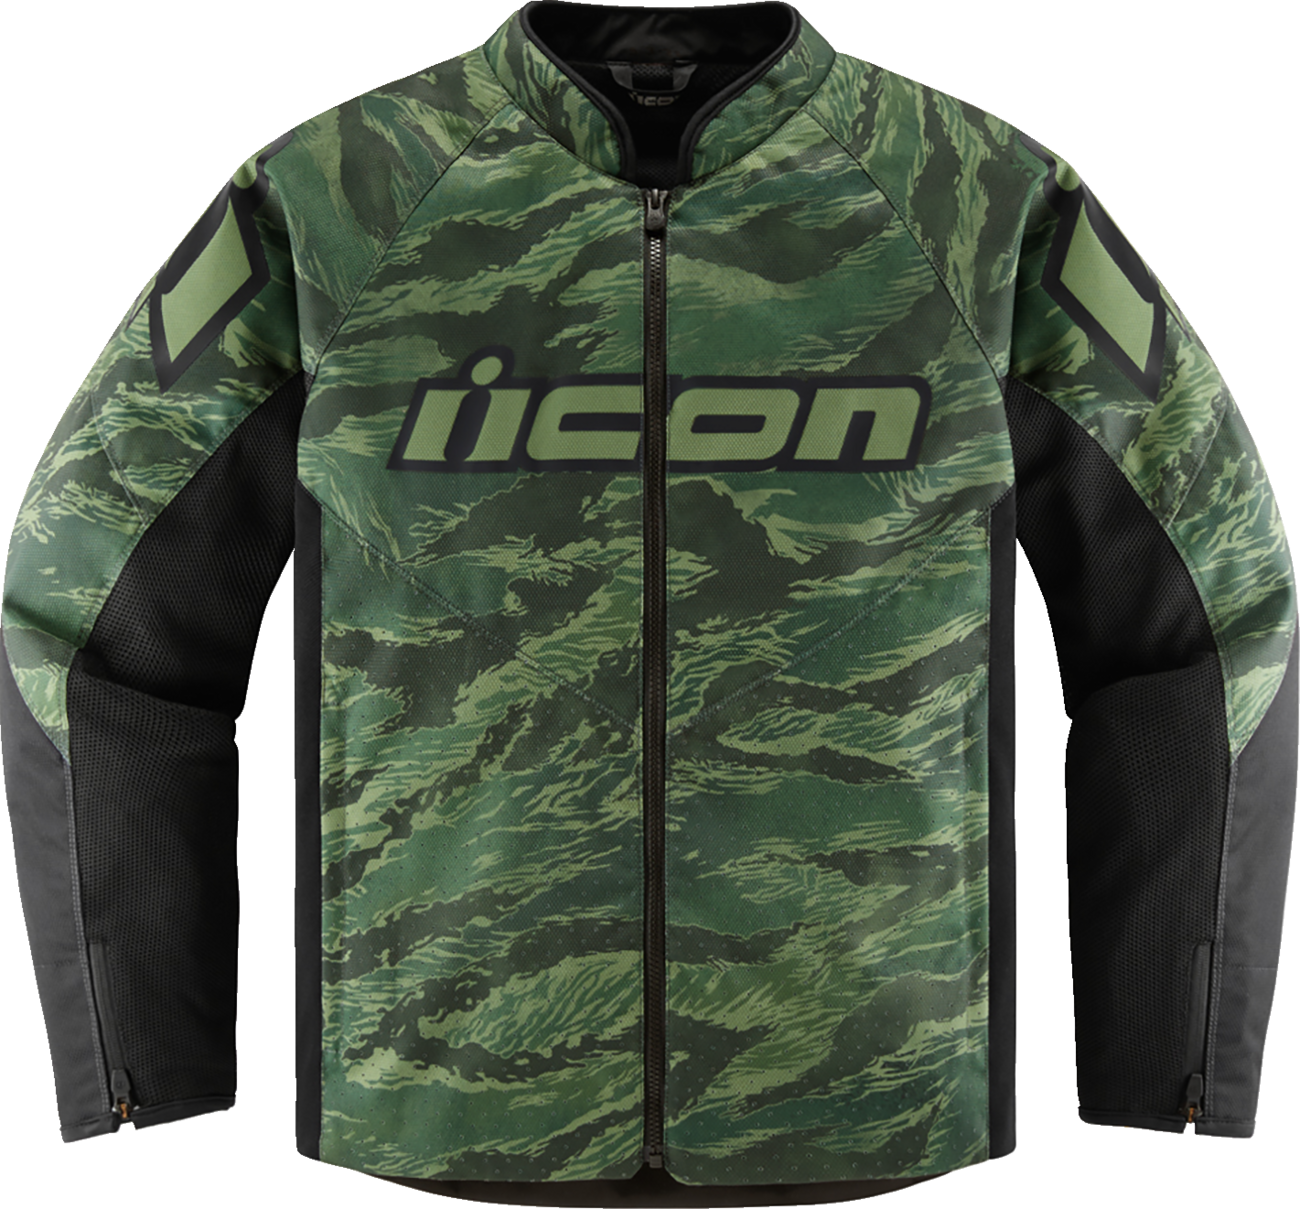 ICON Hooligan CE Tiger's Blood Jacket - Green - Small 2820-6152